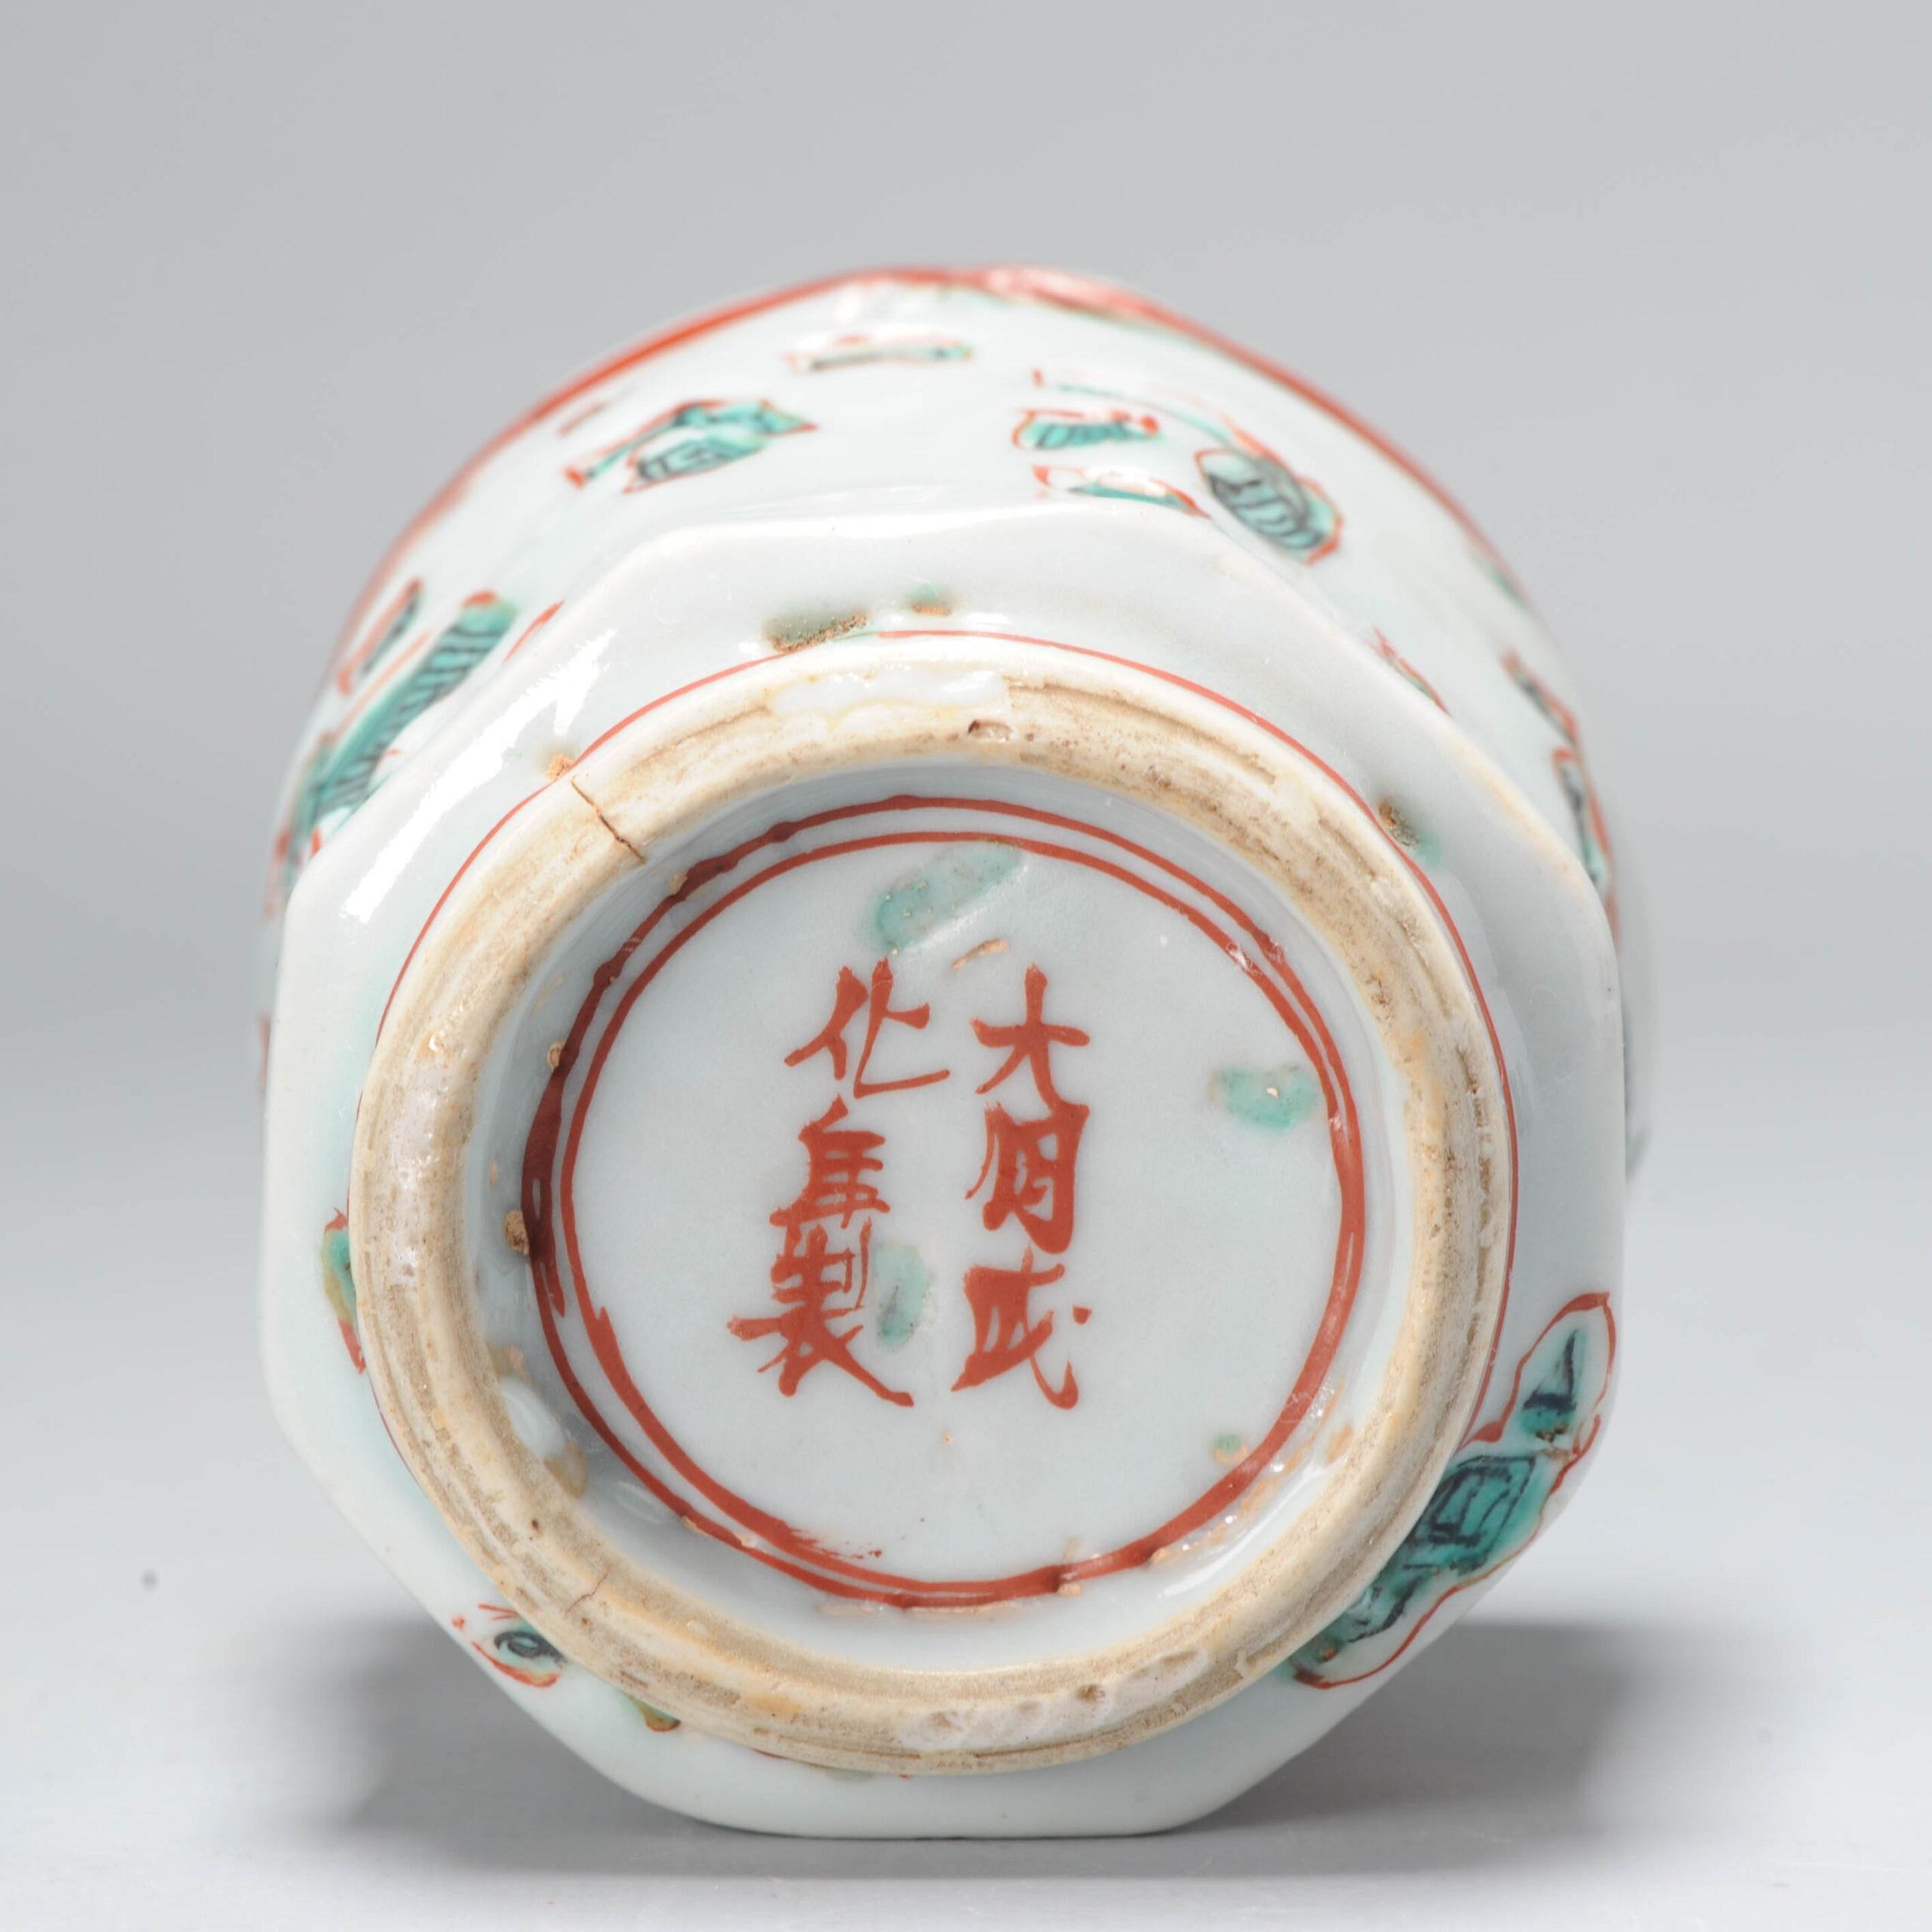 Antique Ko Akae Tea Bowl Cup Chinese Porcelain Chenghua Marked, 17th century In Excellent Condition For Sale In Amsterdam, Noord Holland